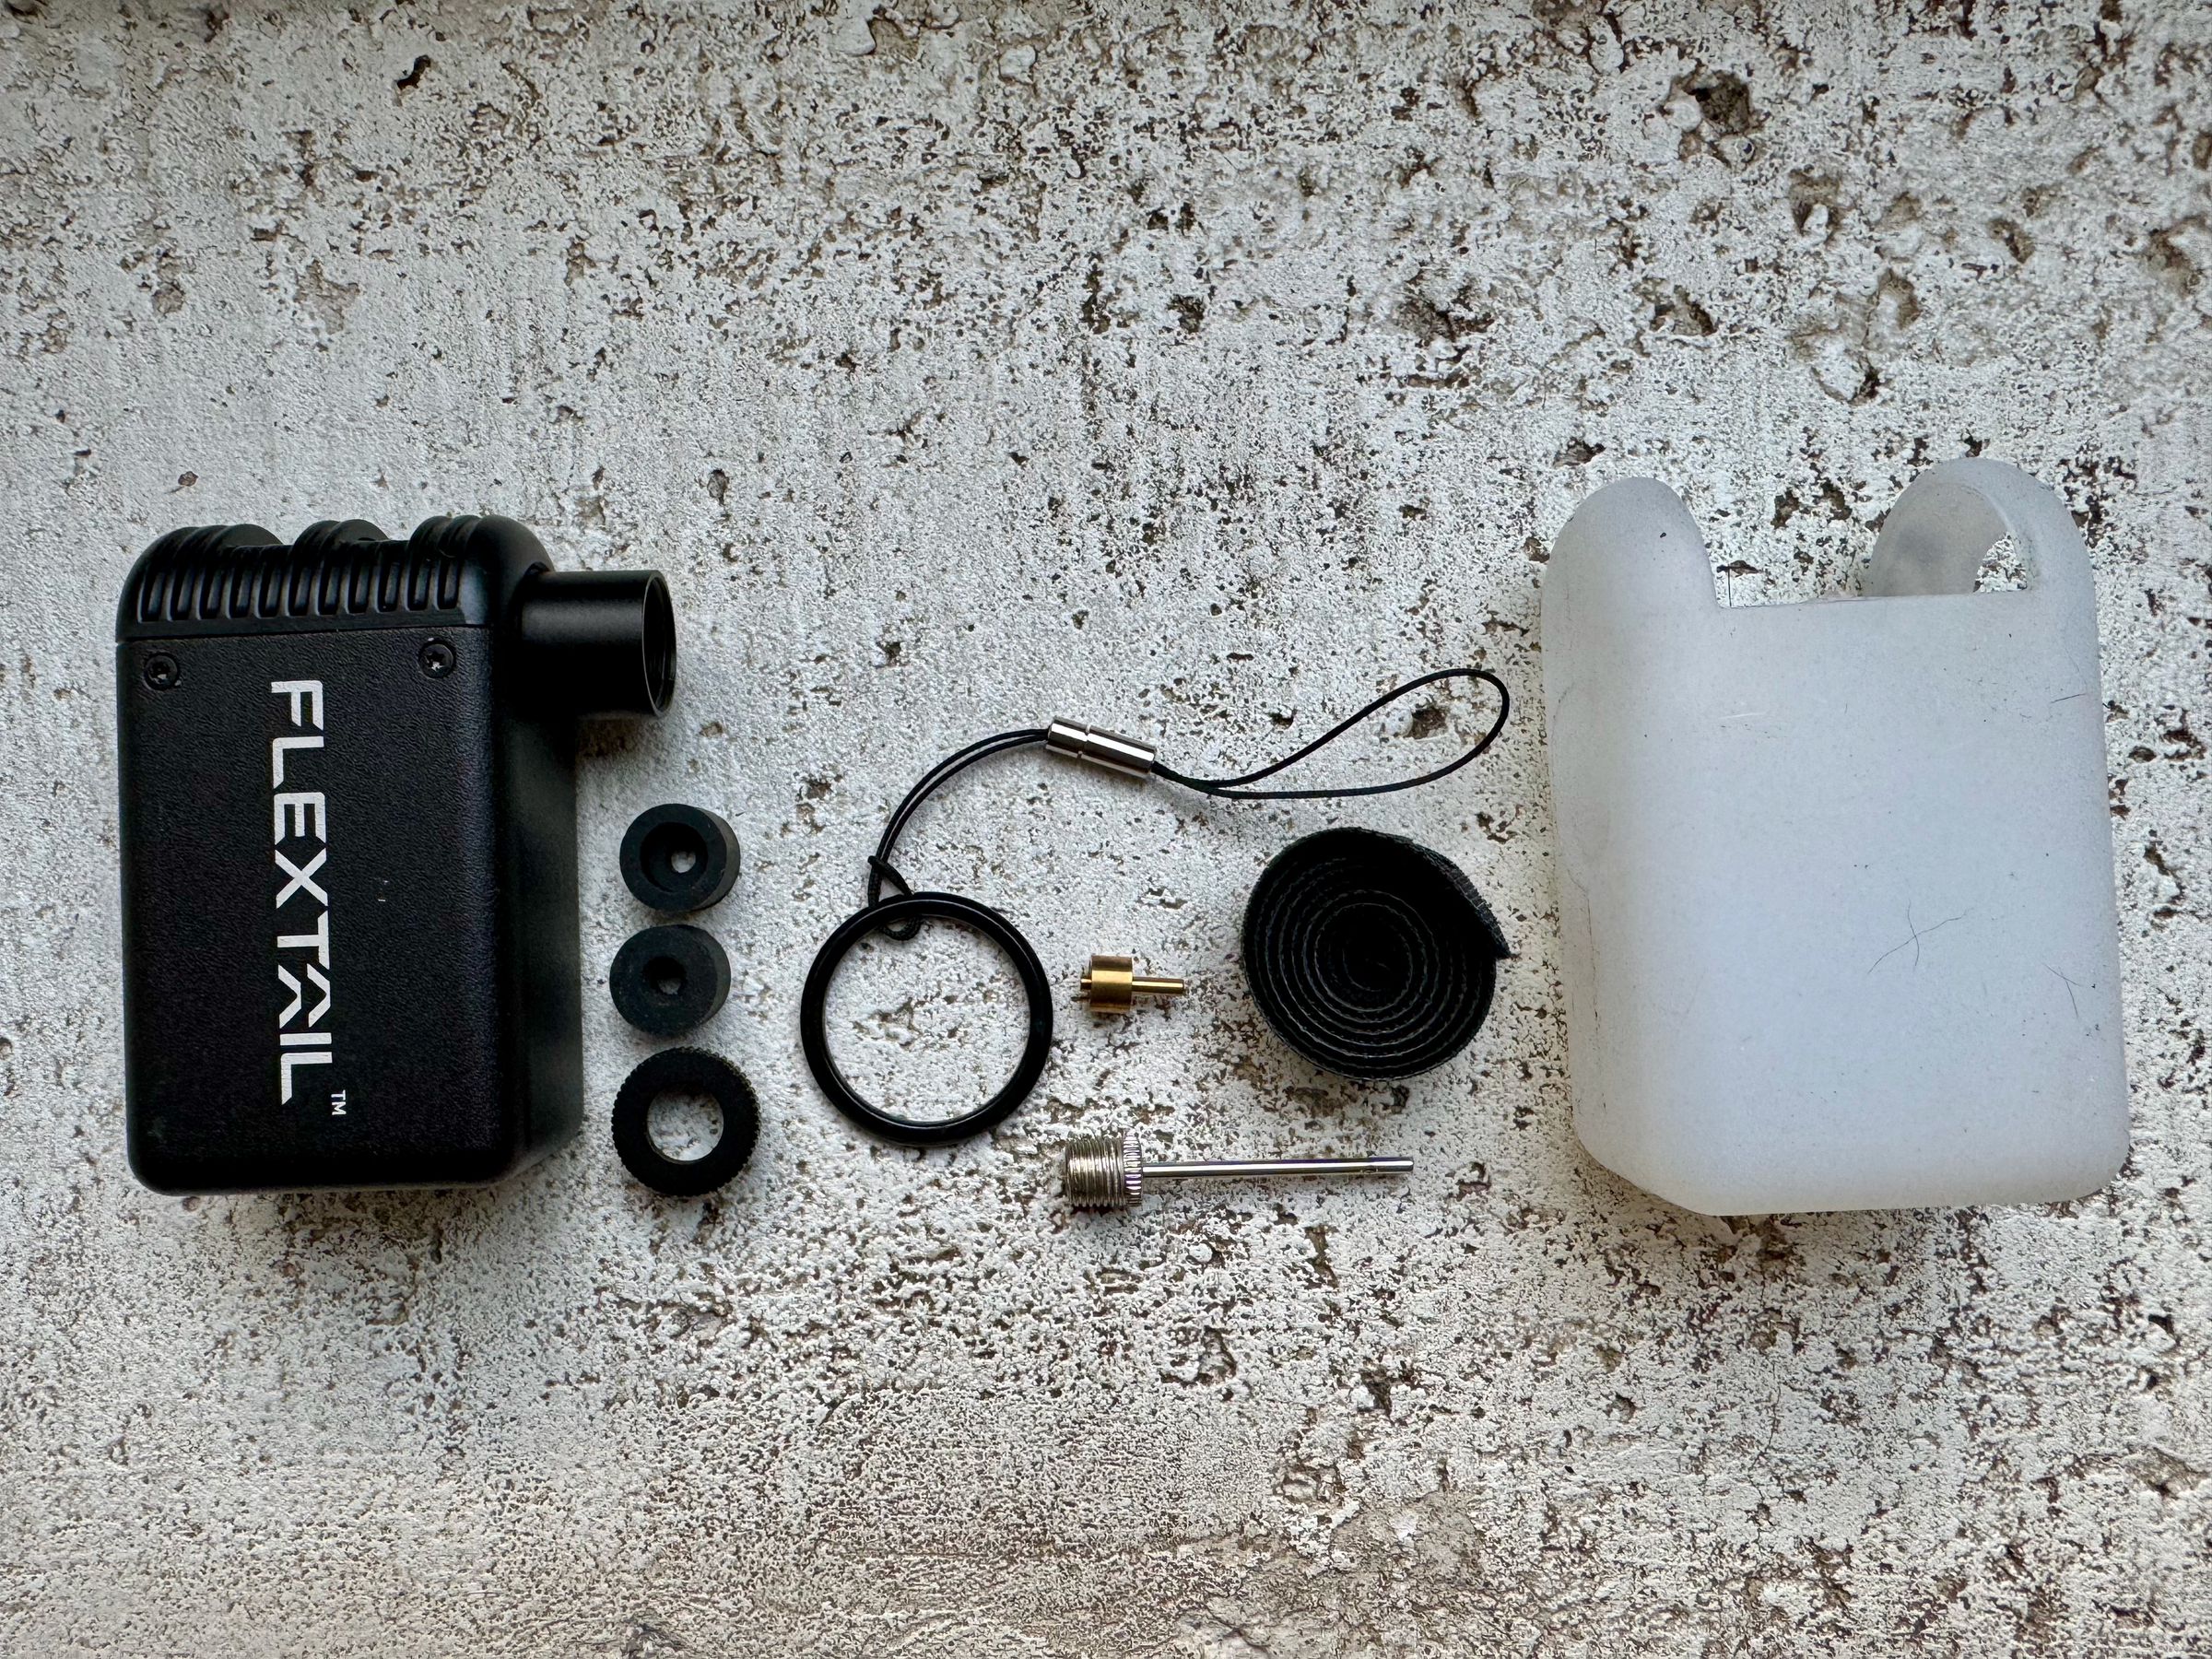 <em>From left to right: the Tiny Bike Pump, two rubber adapter valves and the enclosure that screws the adapters onto the pump nozzle, a carrying ring with strap, pin for Schrader valve adapter, ball pump nozzle, bike strap, and silicon sleeve. Not pictured is the USB-A to USB-C cable included in the box.</em>